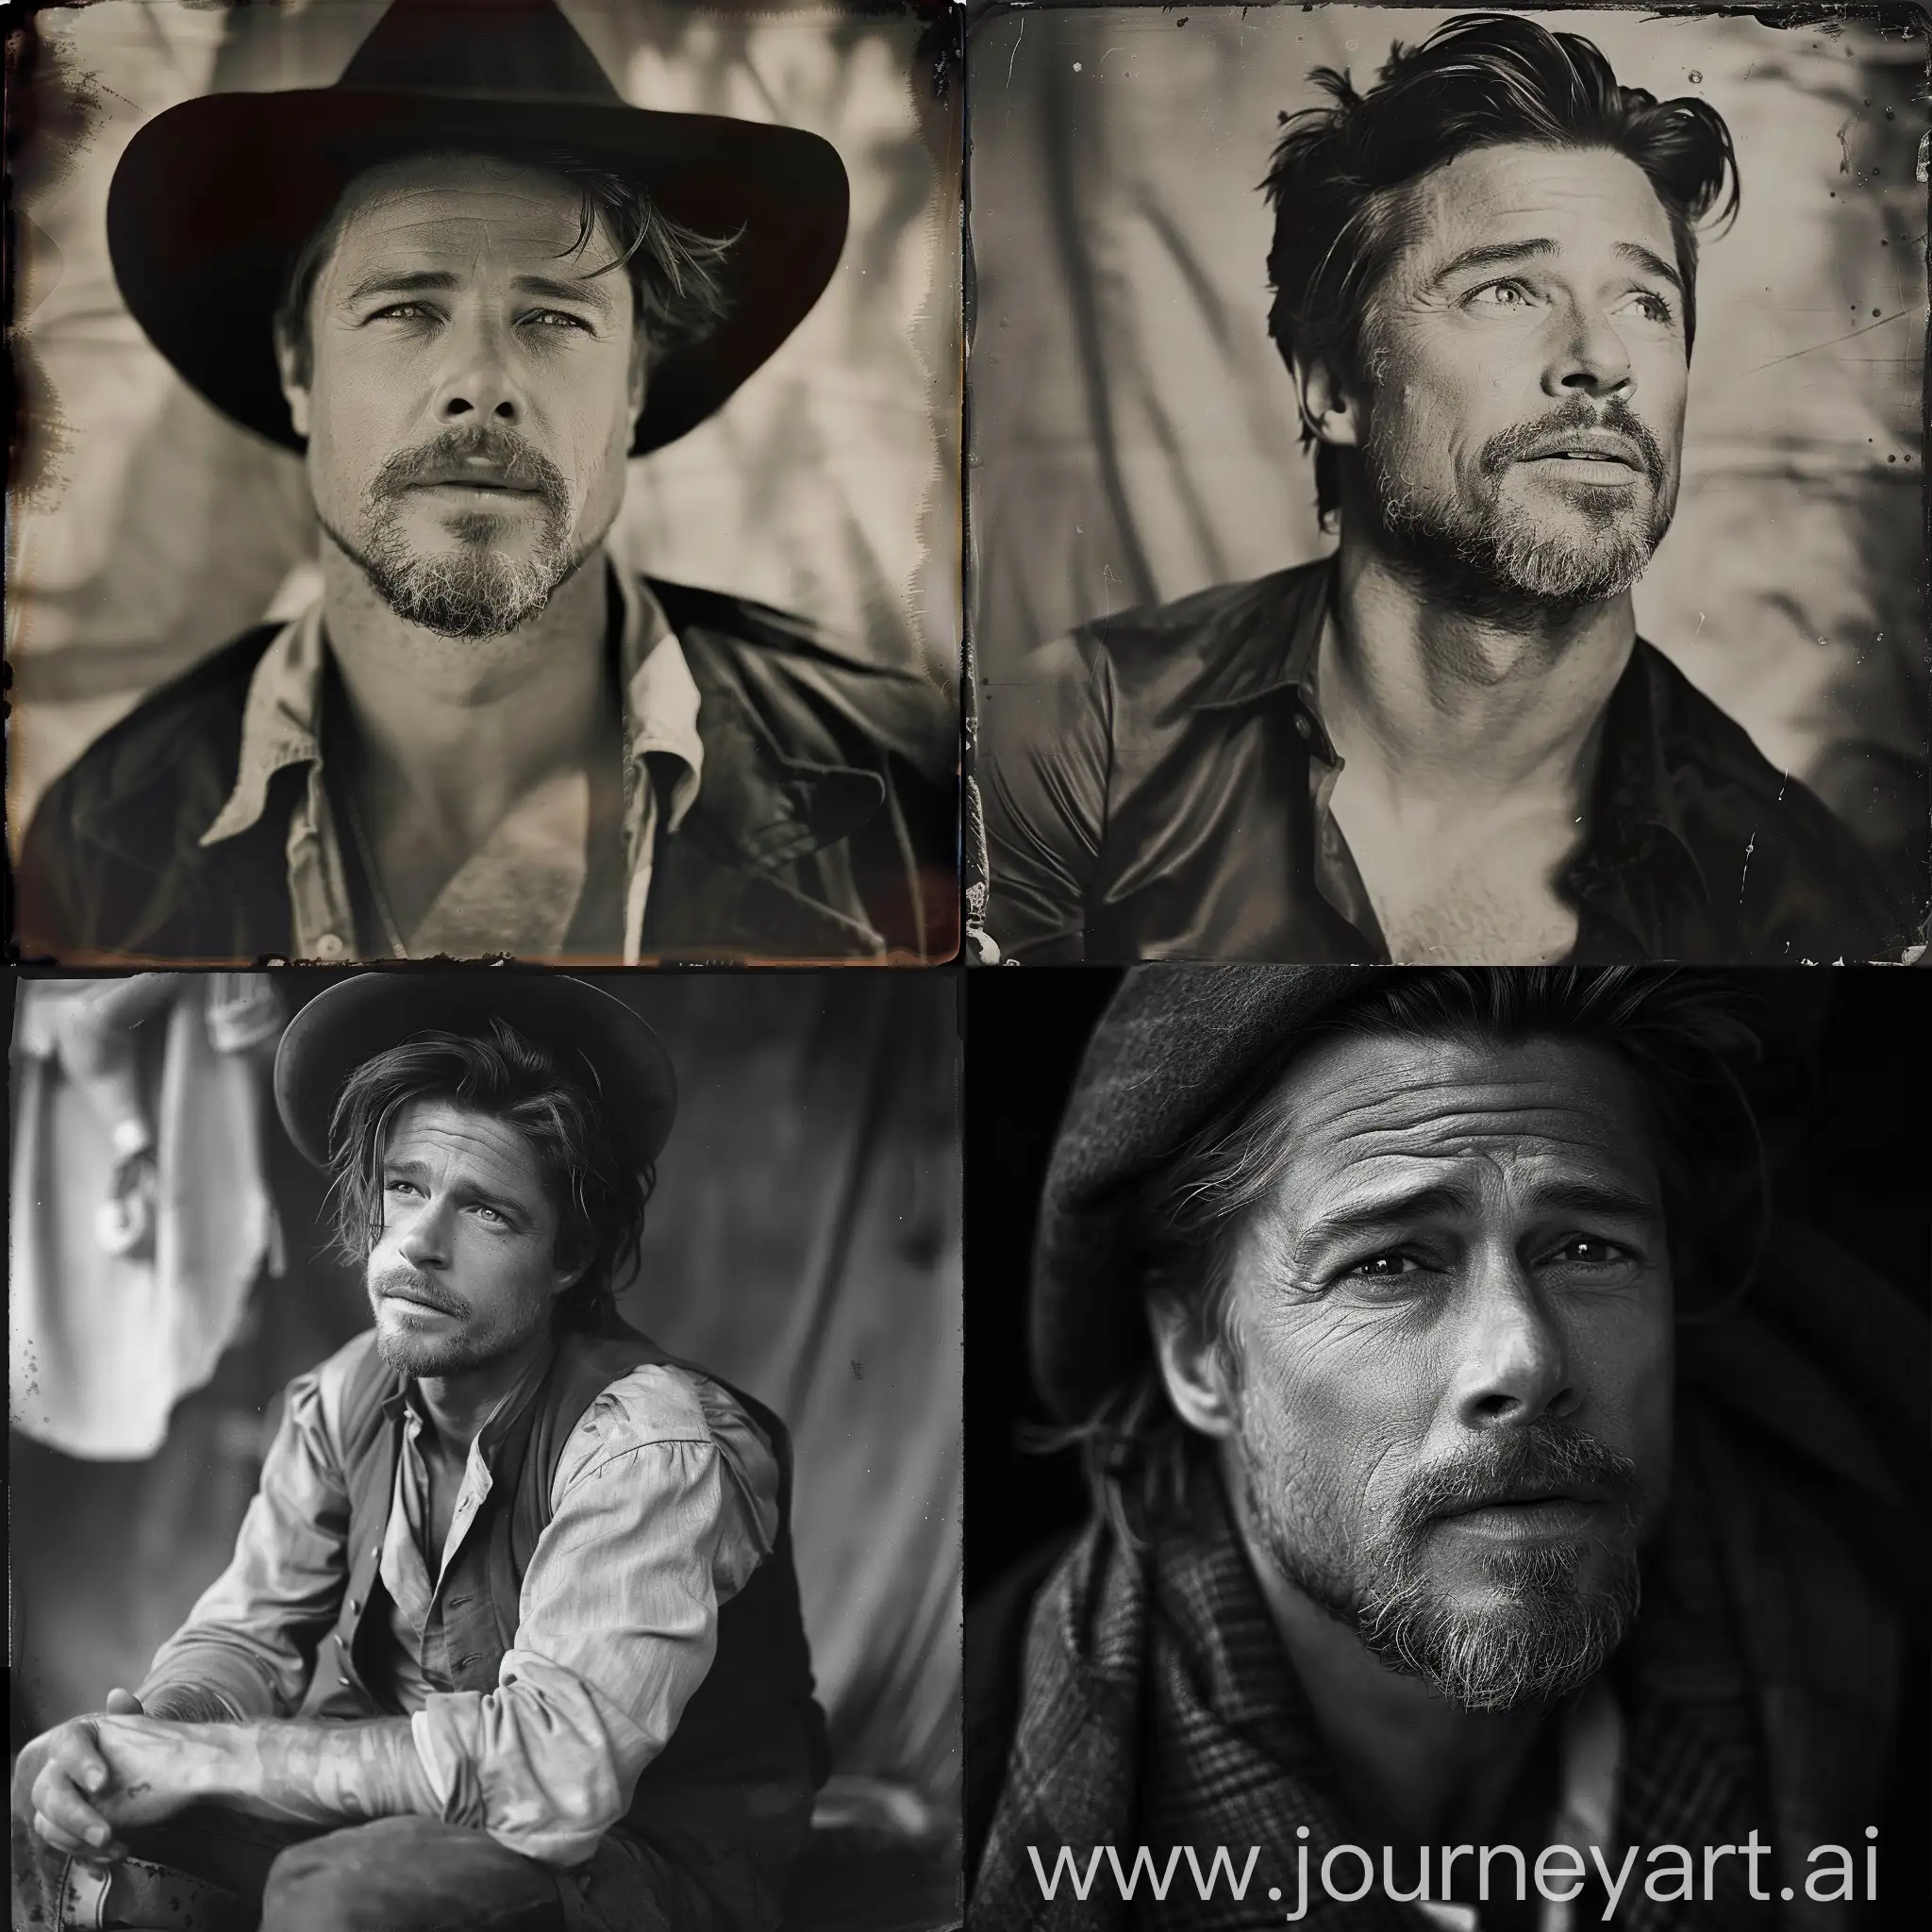 Vintage-Black-and-White-Portrait-of-Brad-Pitt-on-a-Plate-1908-Photography-Style